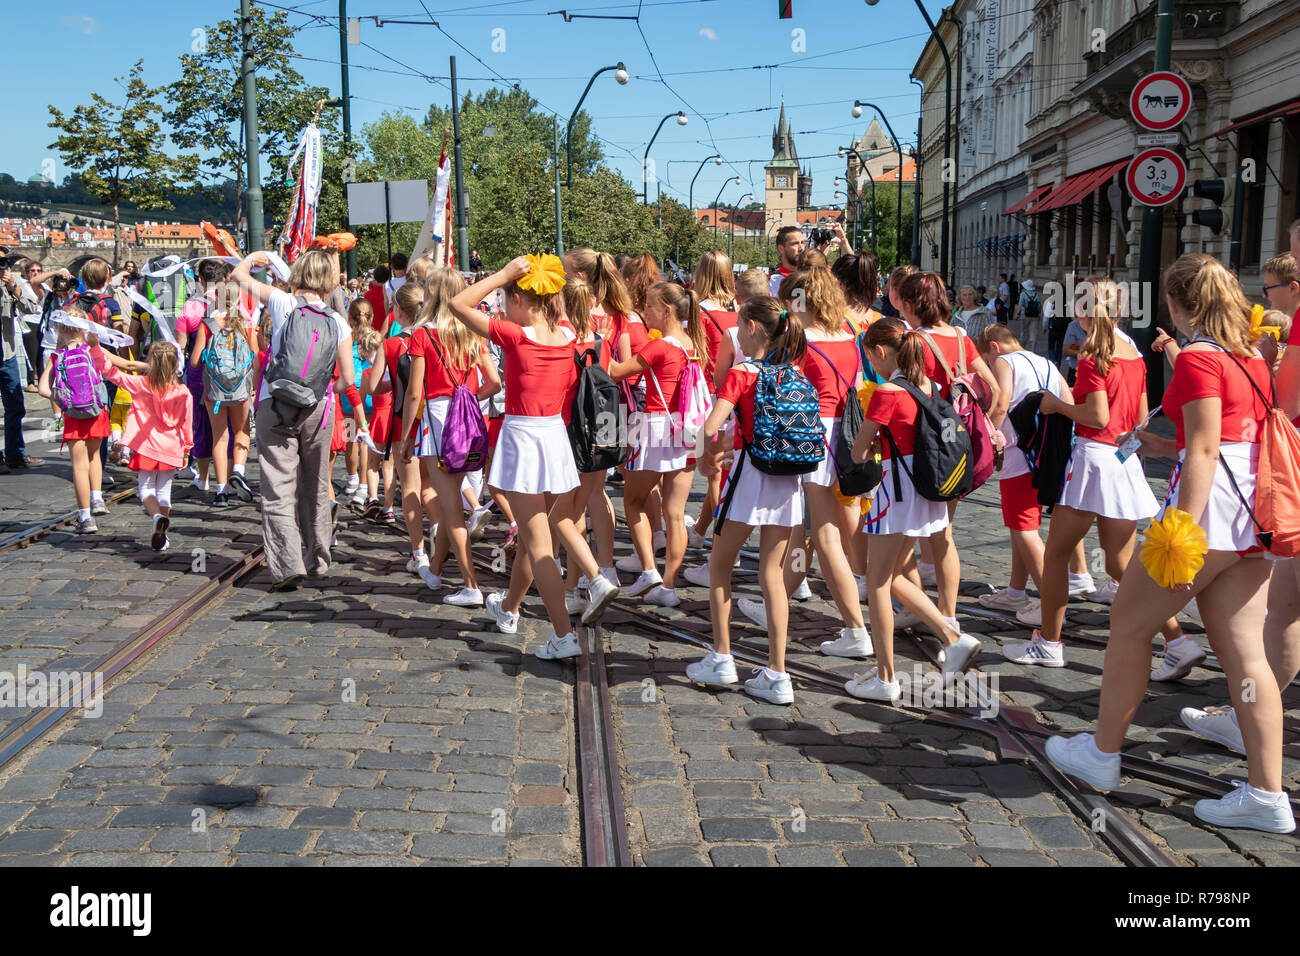 PRAGUE, CZECH REPUBLIC - JULY 1, 2018: Teenagers parading at Sokolsky Slet, a once-every-six-years gathering of the Sokol movement - a Czech sports as Stock Photo